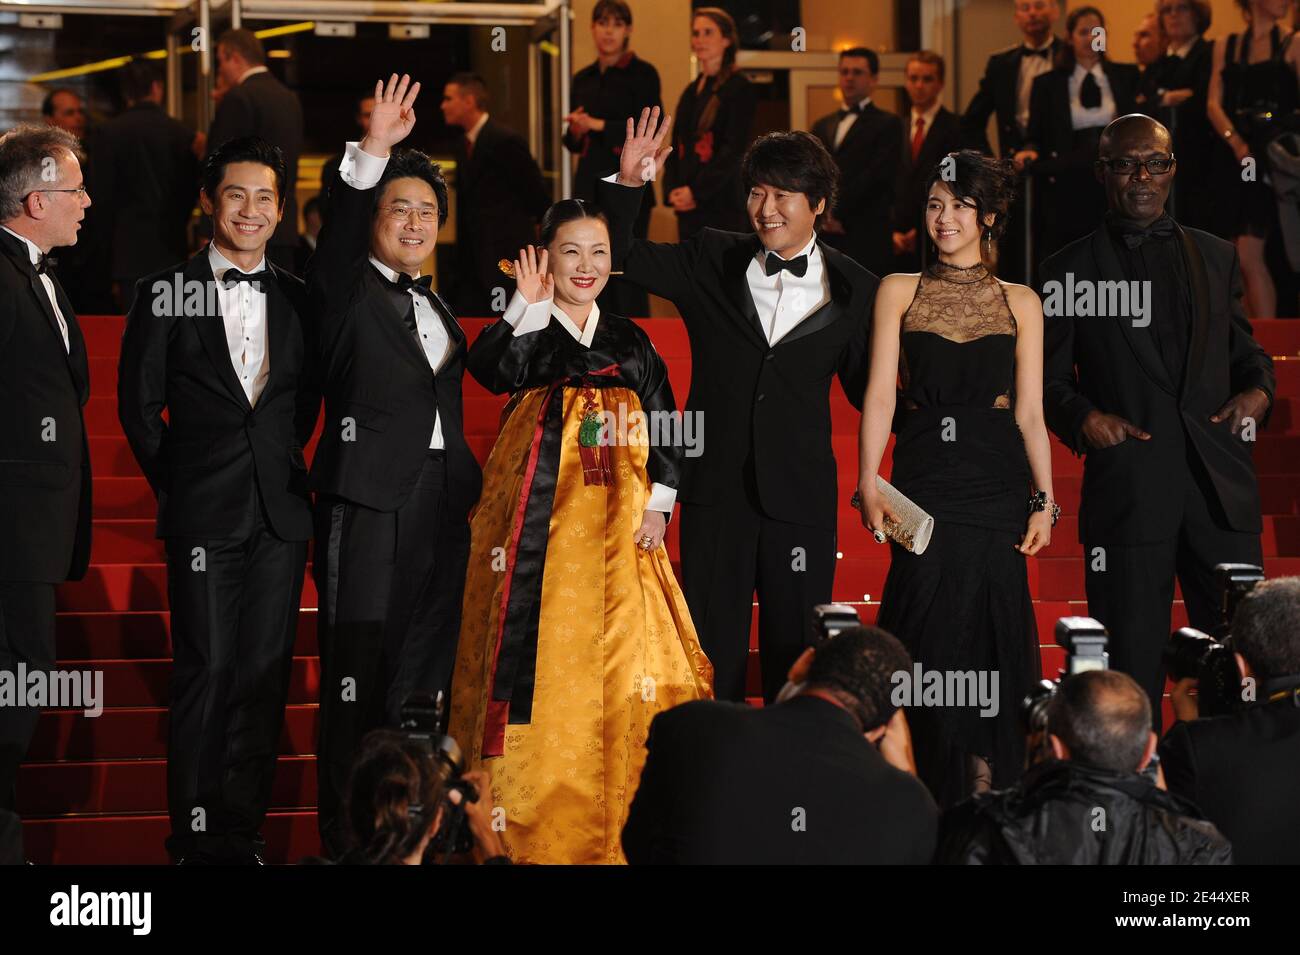 South-Korean director Chan-Wook Park (2ndL), Kim Ok-Bin (2ndR), Kim Hae-Sook (C), Song Kang-Ho (3ndR) and Shin Ha-Kyun (L) arriving to the screening of 'Thirst' during the 62nd Cannes Film Festival at the Palais des Festivals in Cannes, France on May 15, 2009. Photo by Nebinger-Orban/ABACAPRESS.COM Stock Photo